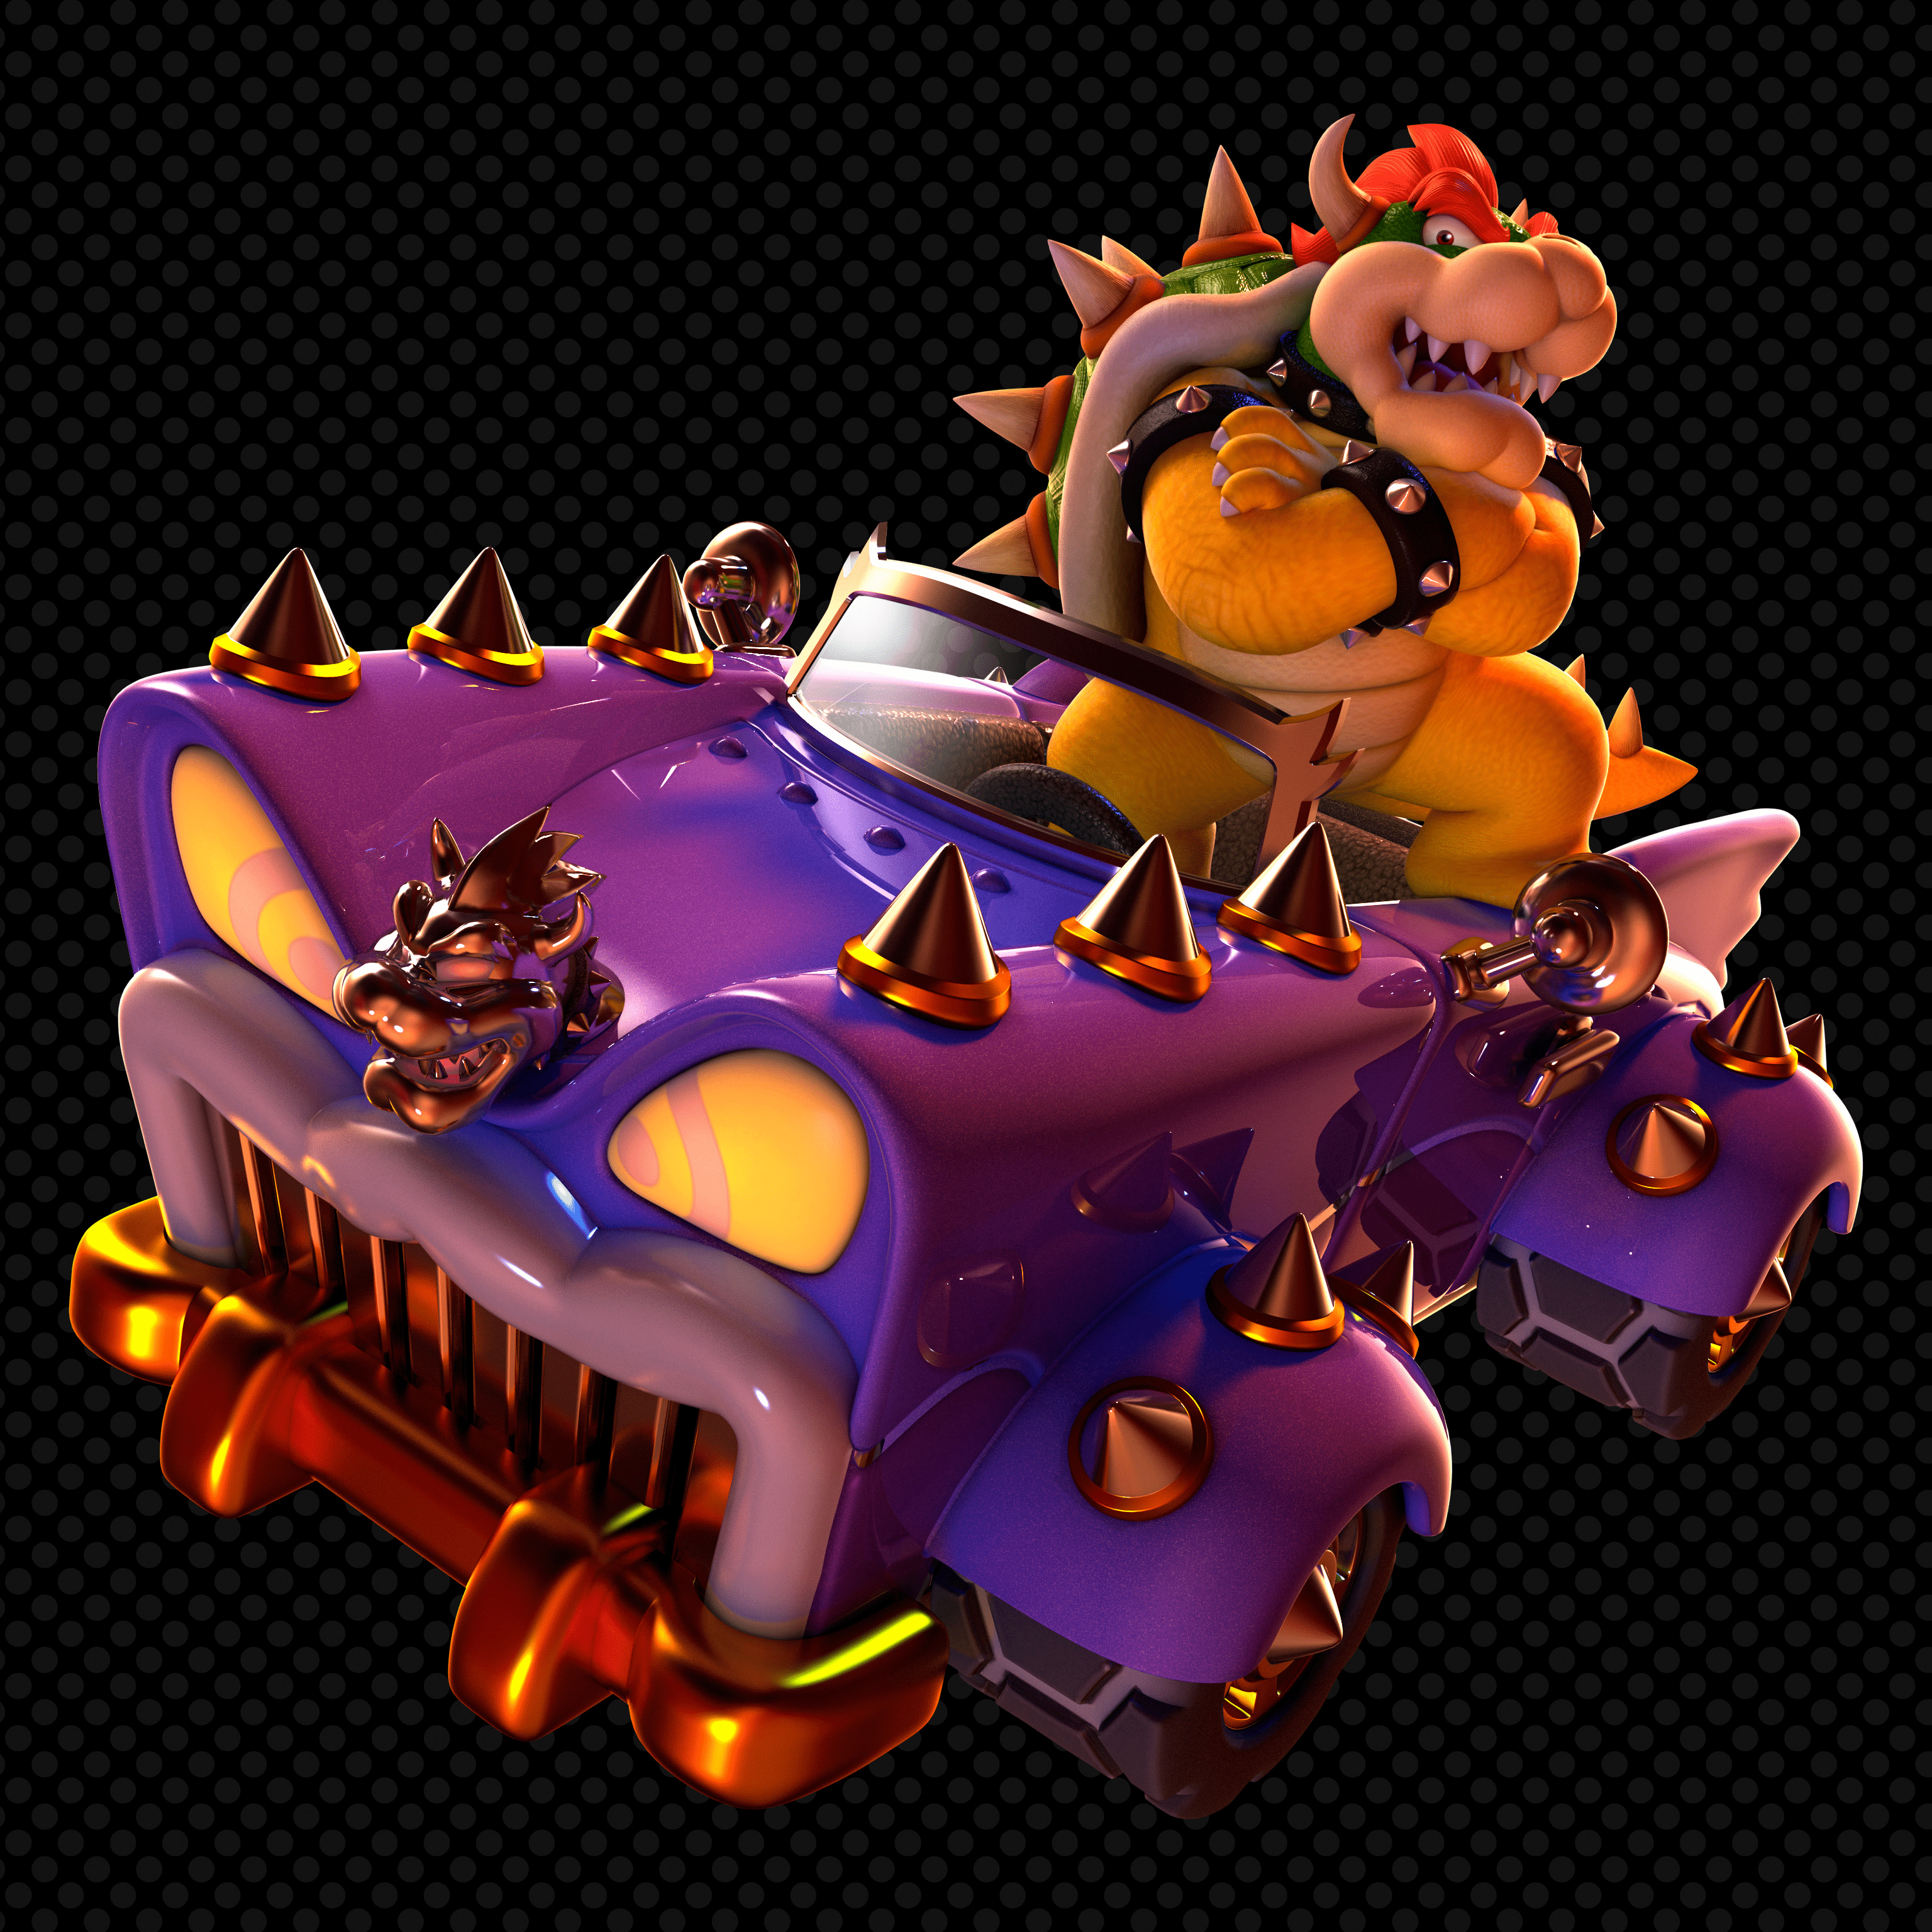 A purple car with a face on it and spikes on the hood. - Bowser